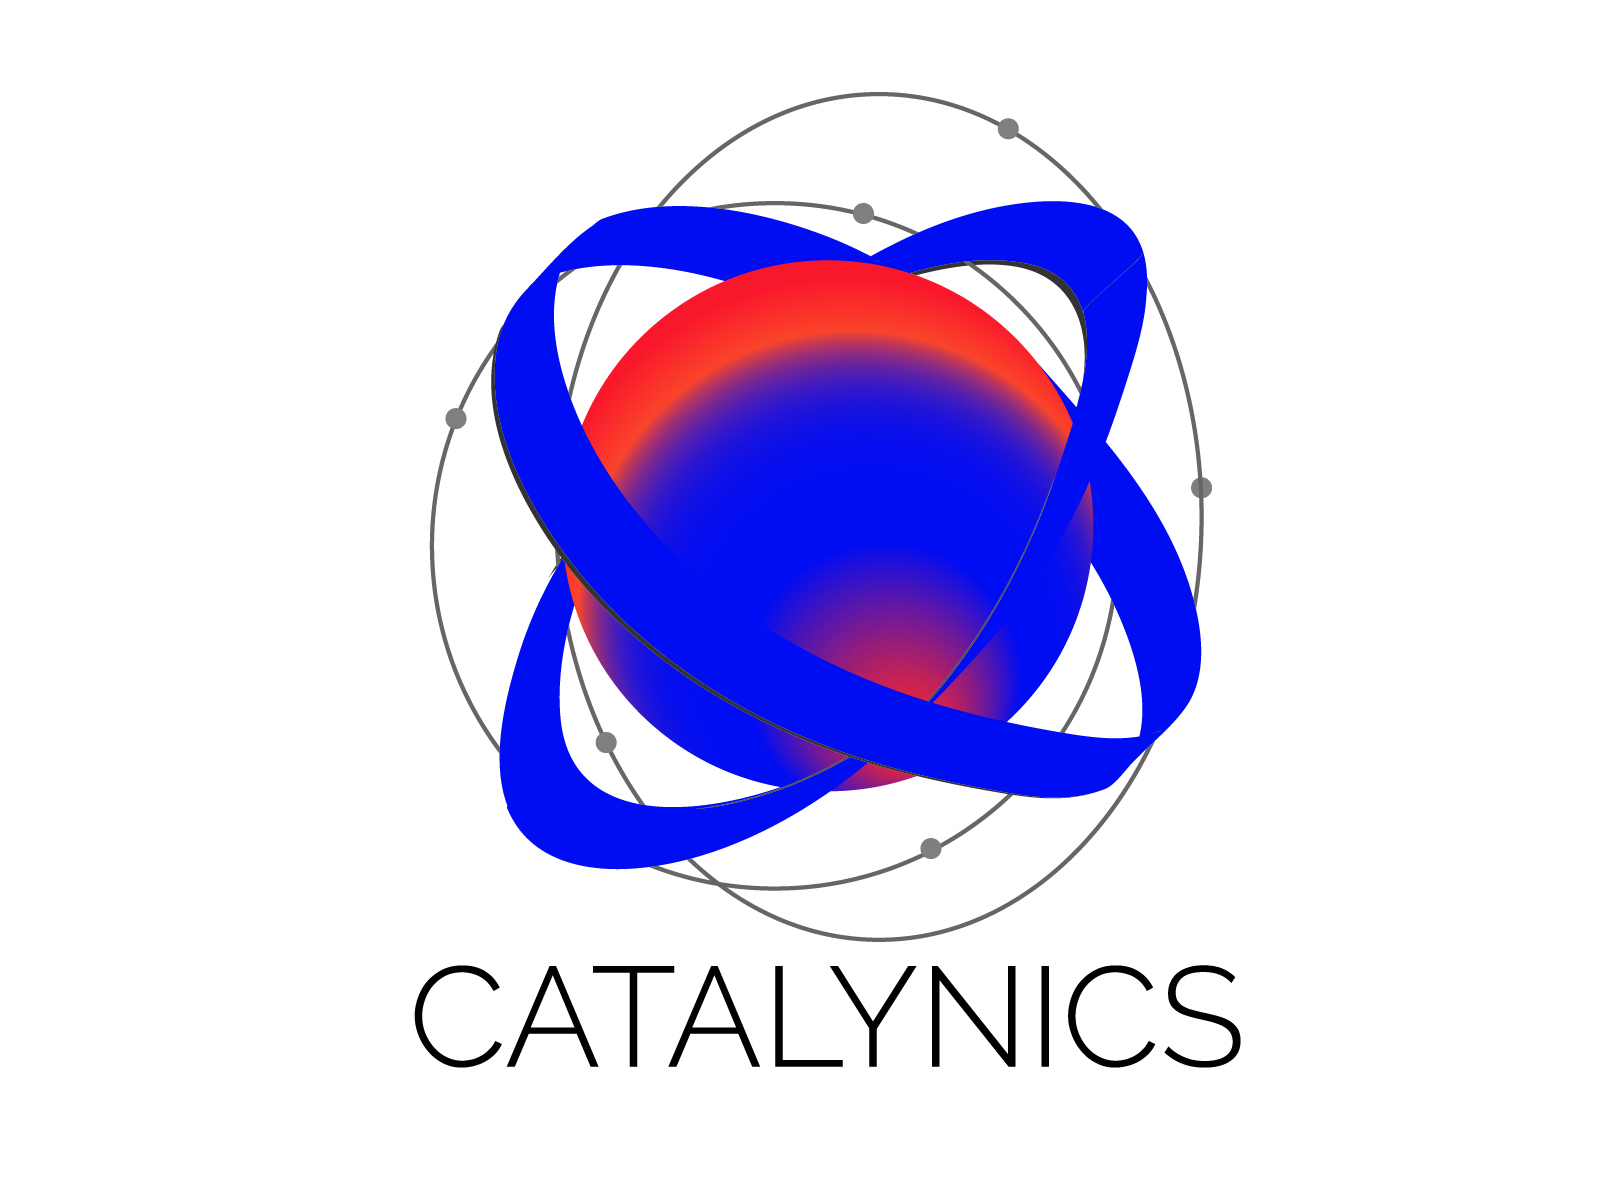 Drawing on deep expertise working with corporations, NGOs and policy makers, Catalynics helps social impact and sustainability professionals and organizations build the leadership skills, relationships, and partnerships they need for high impact results. 